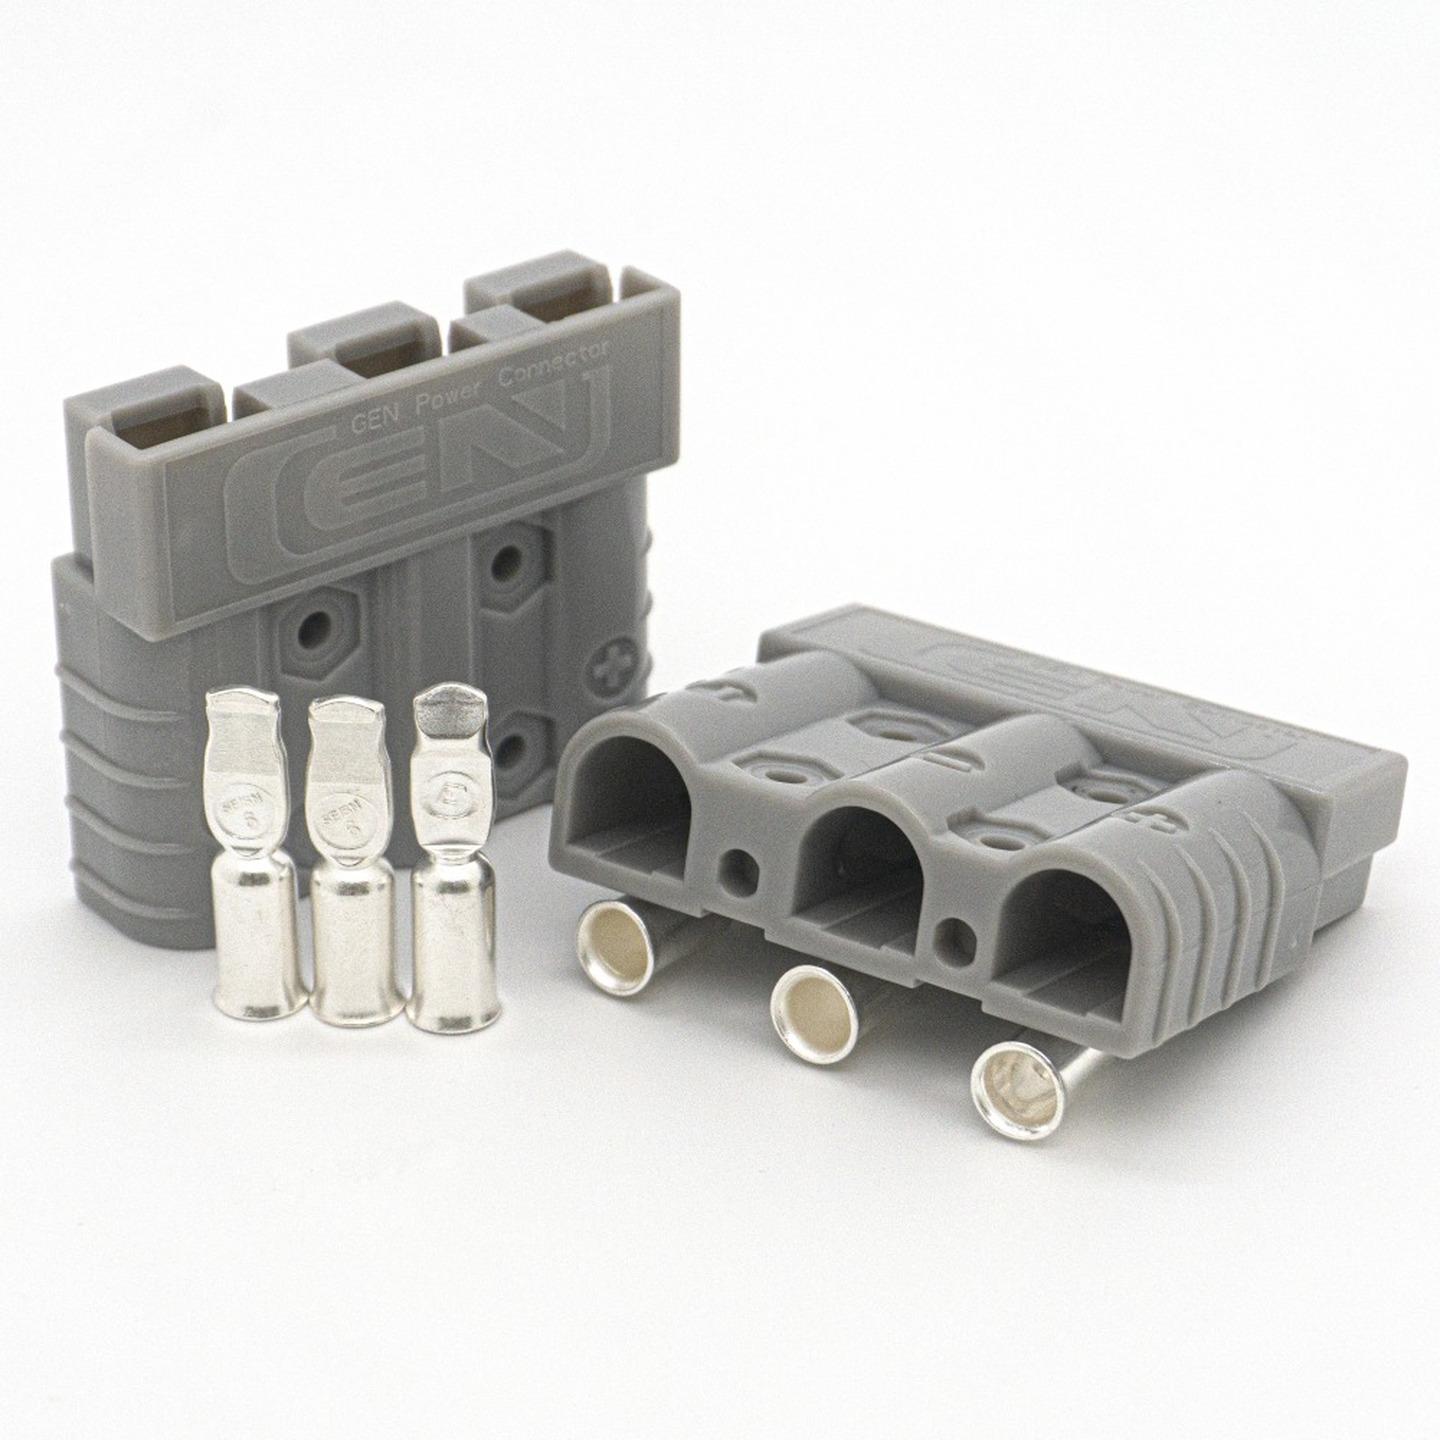 3 Pin High Current 50A Connector - Twin Pack